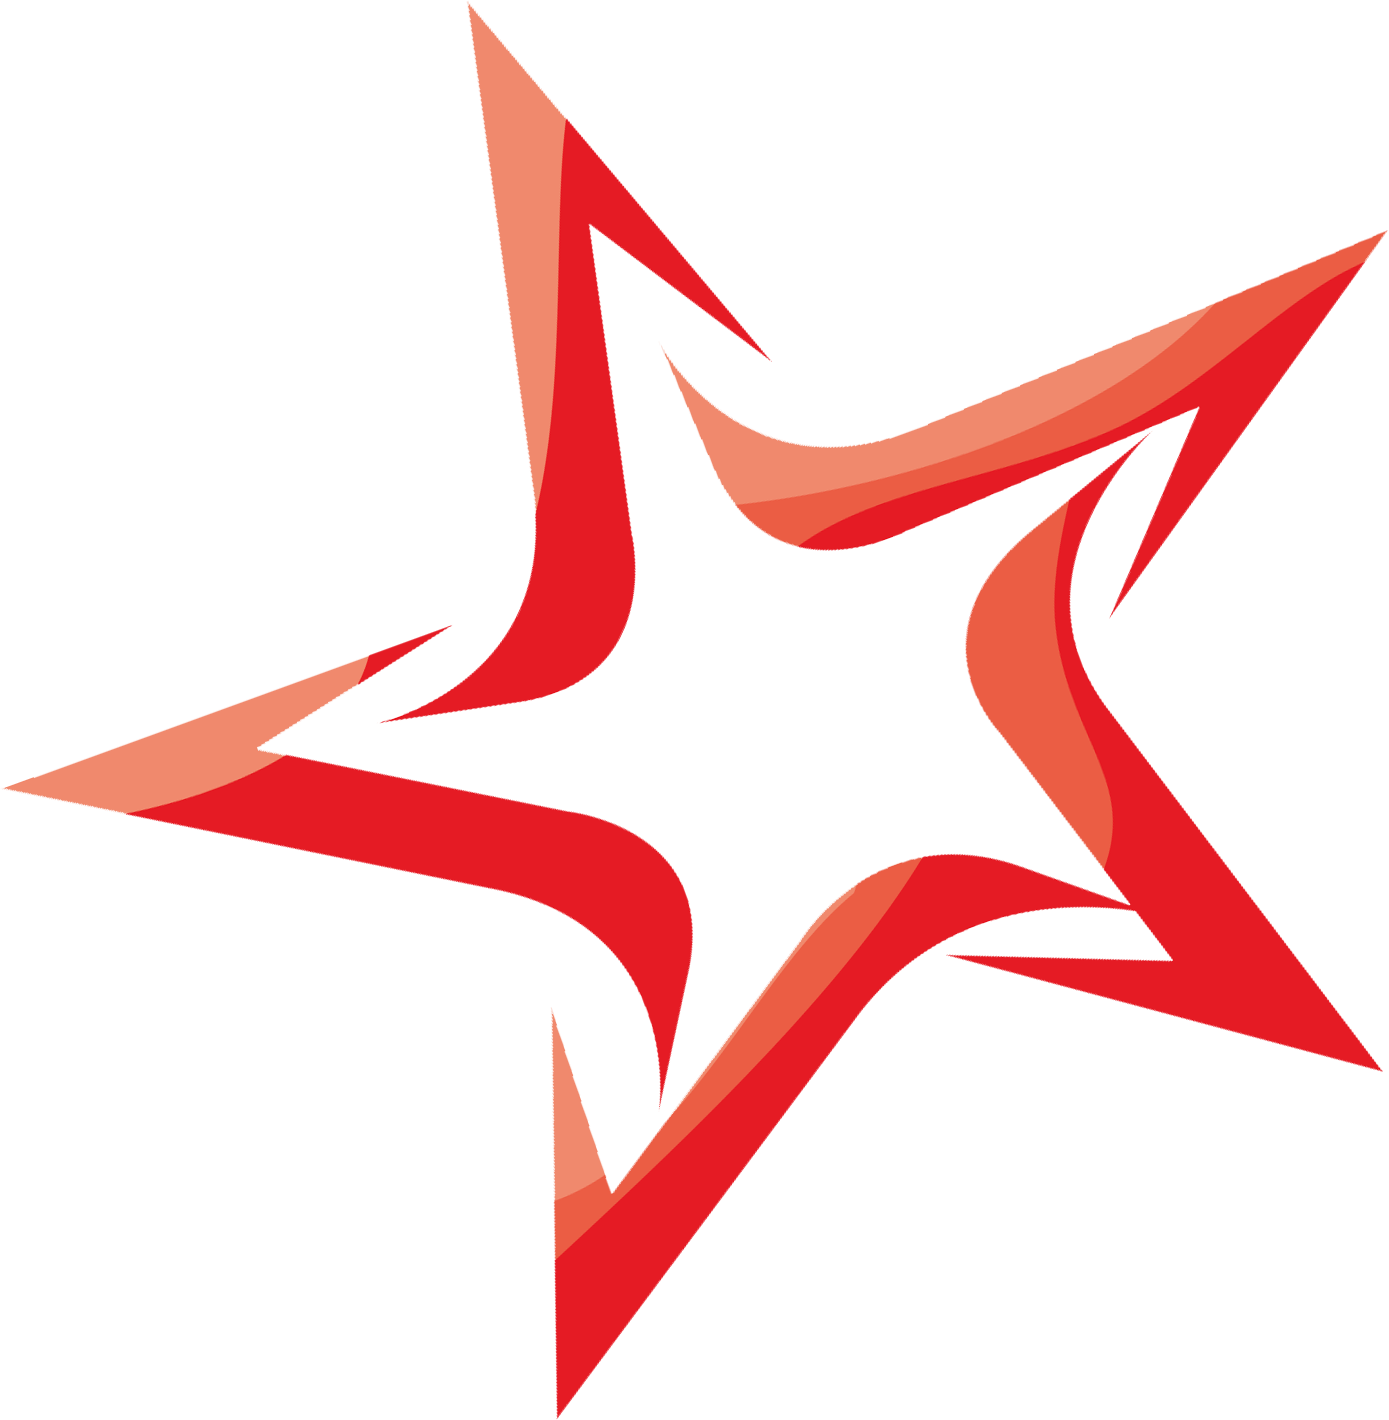 White and Red Star Logo - Svg black and white stock red star - RR collections